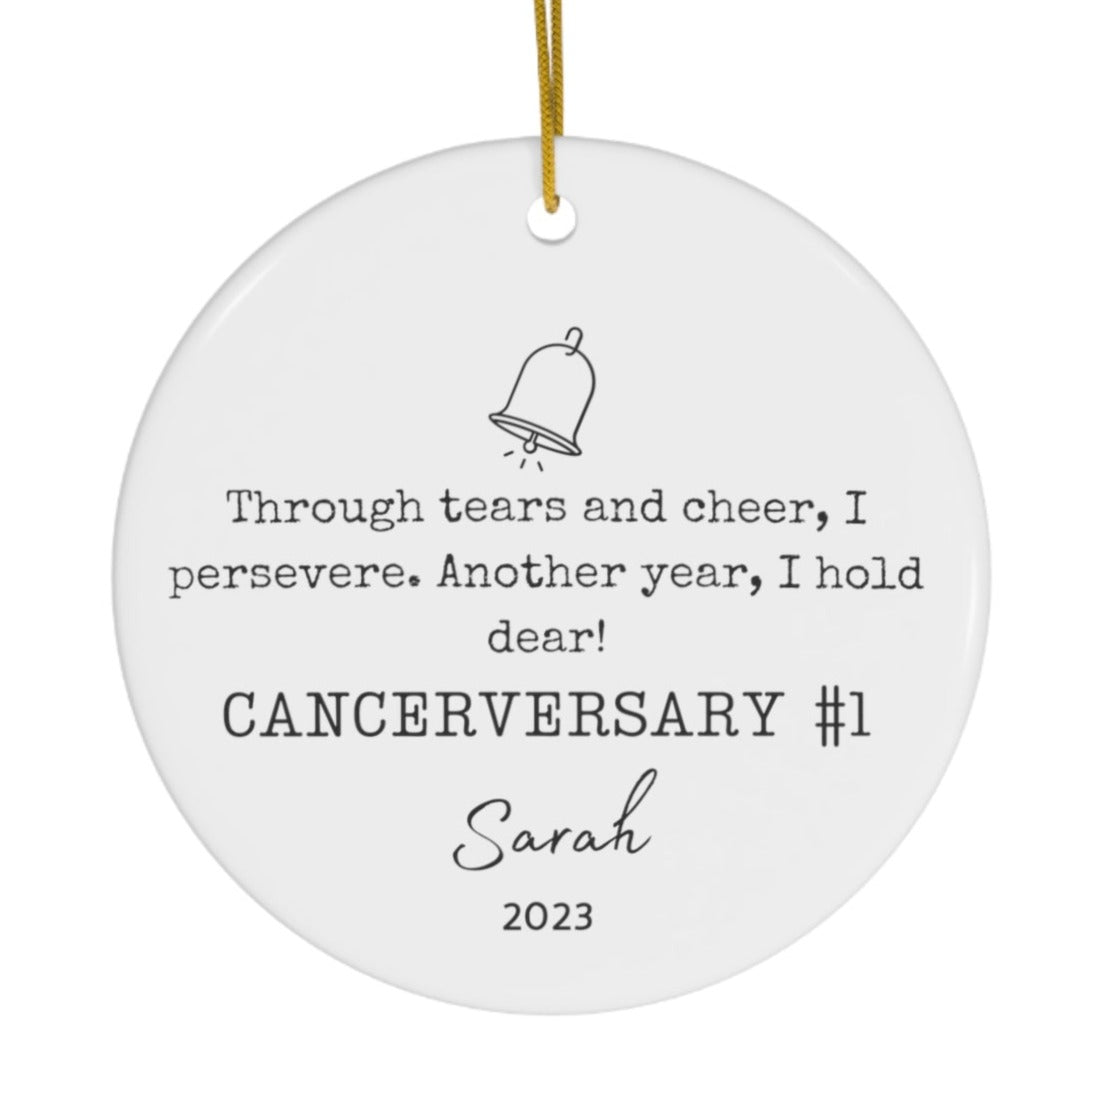 Personalized Ceramic Ornament, Cancerversary Bell